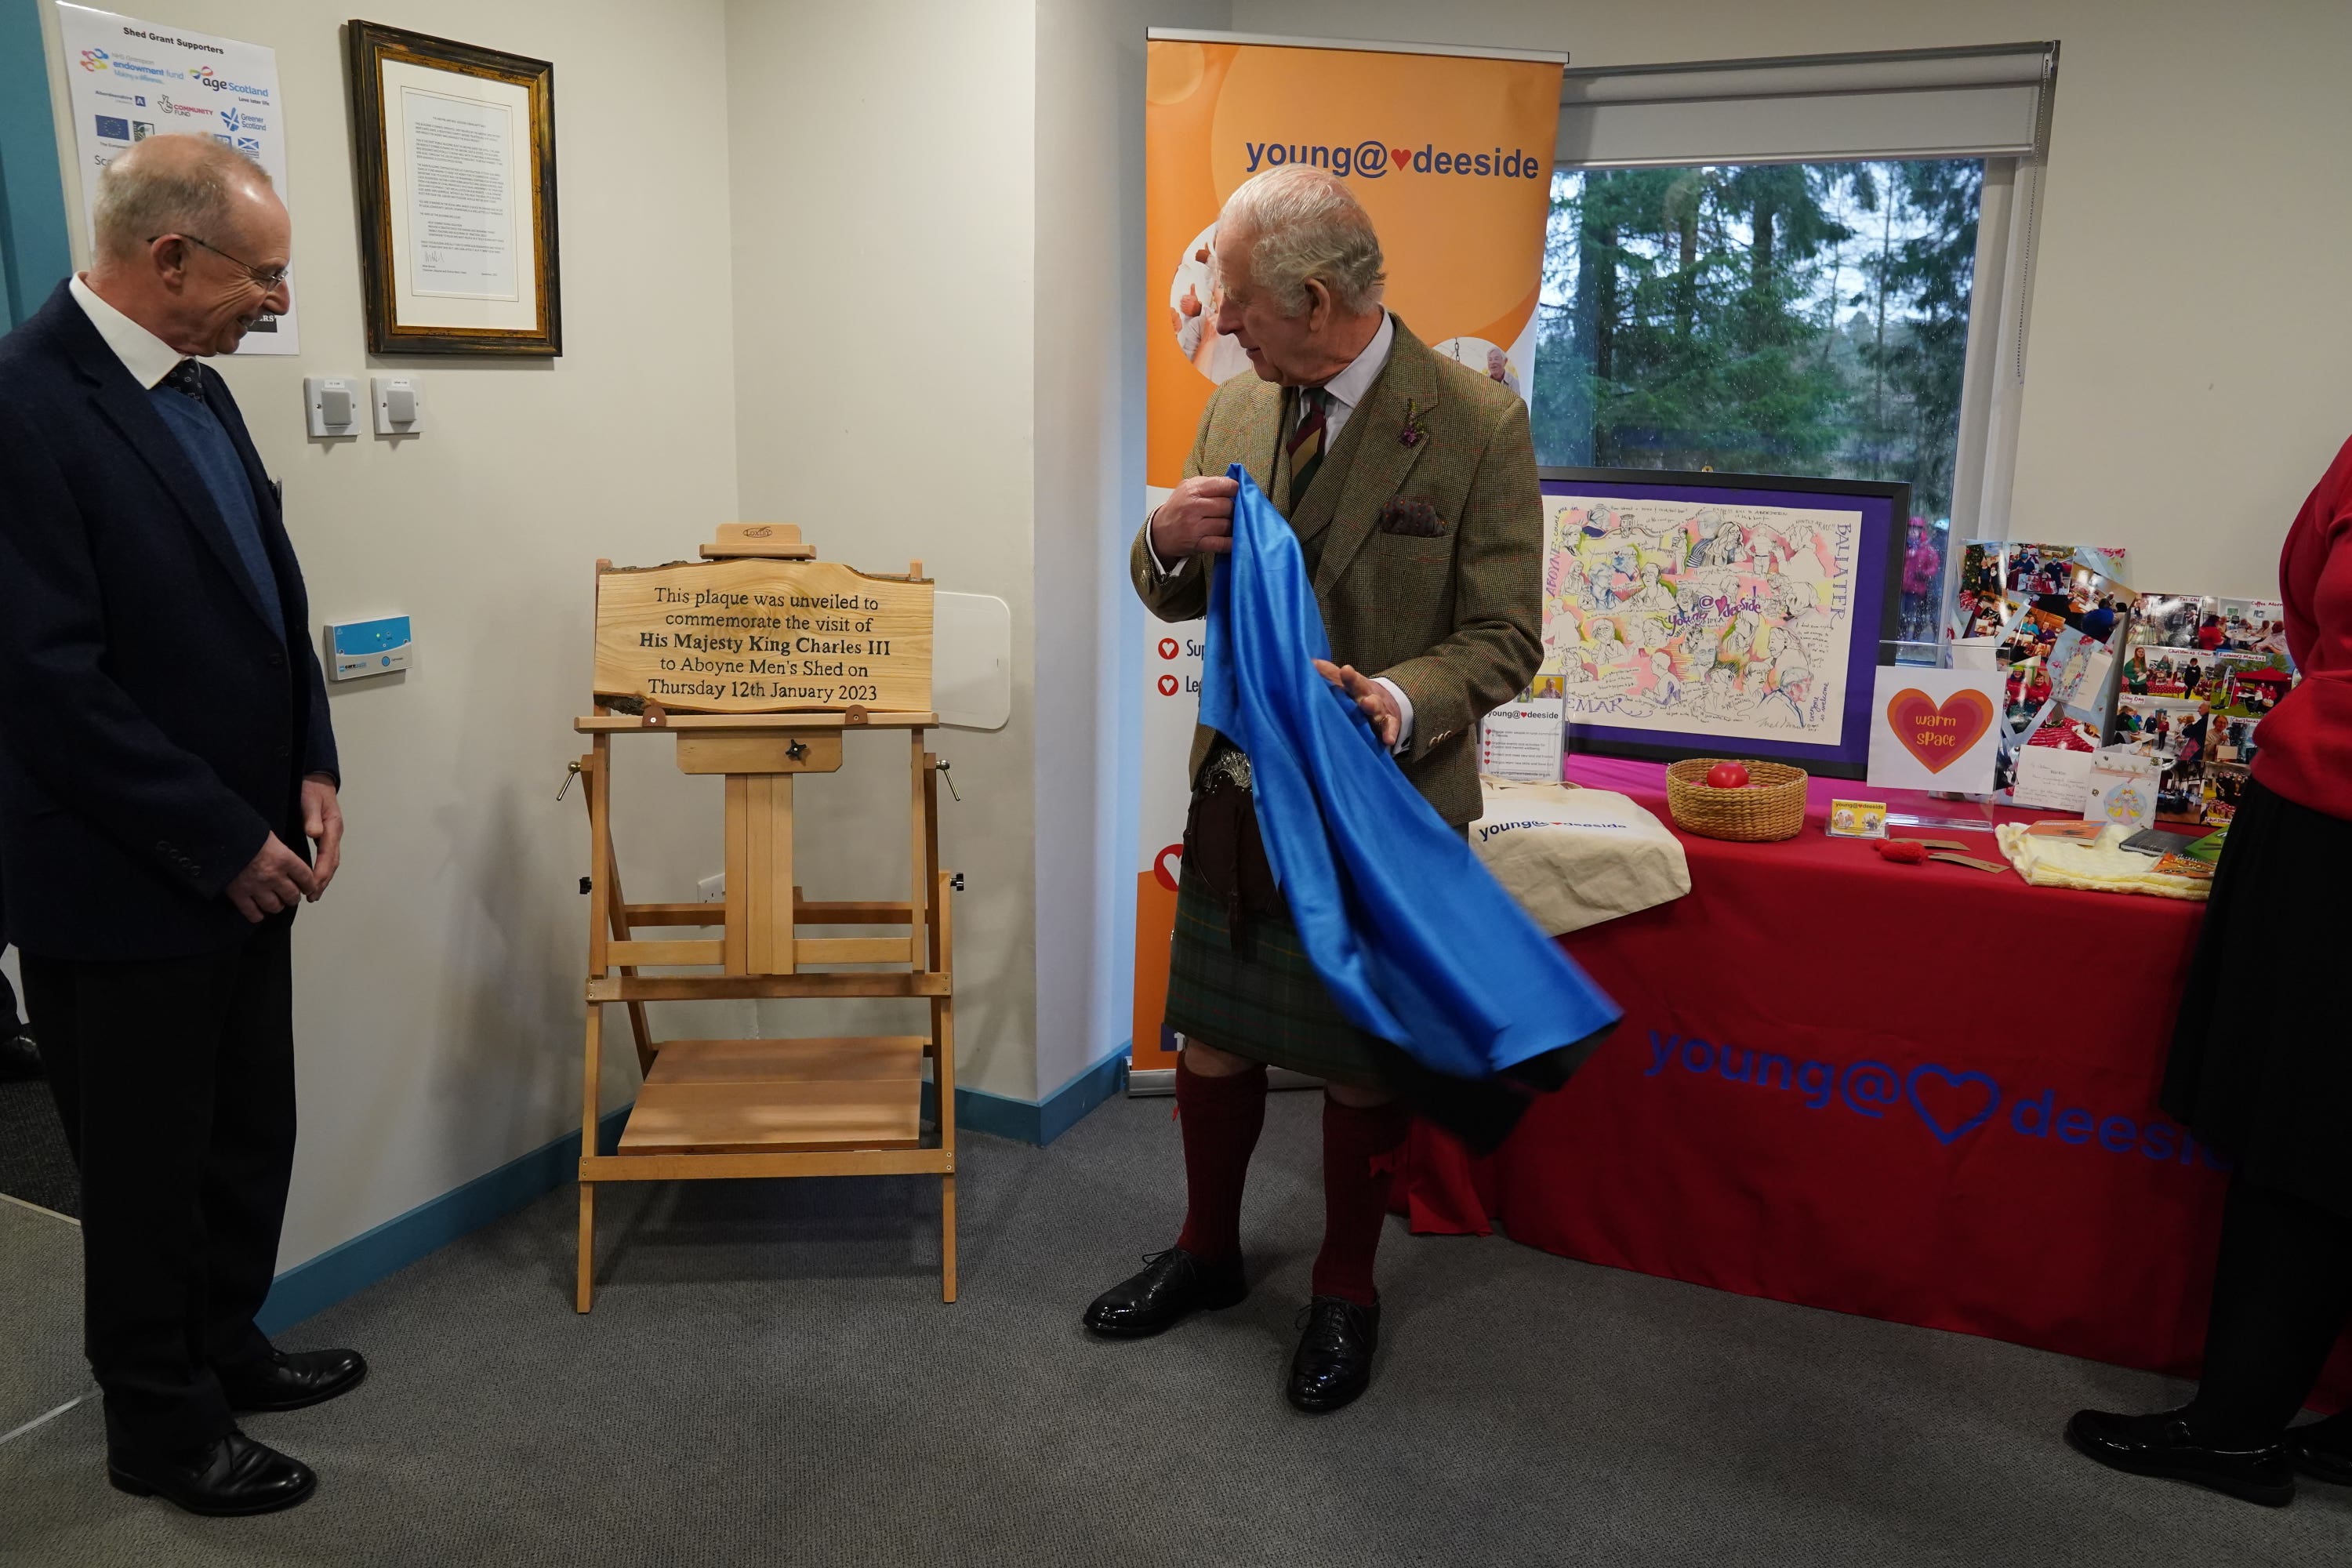 Charles unveiled a plaque made to commemorate his visit.